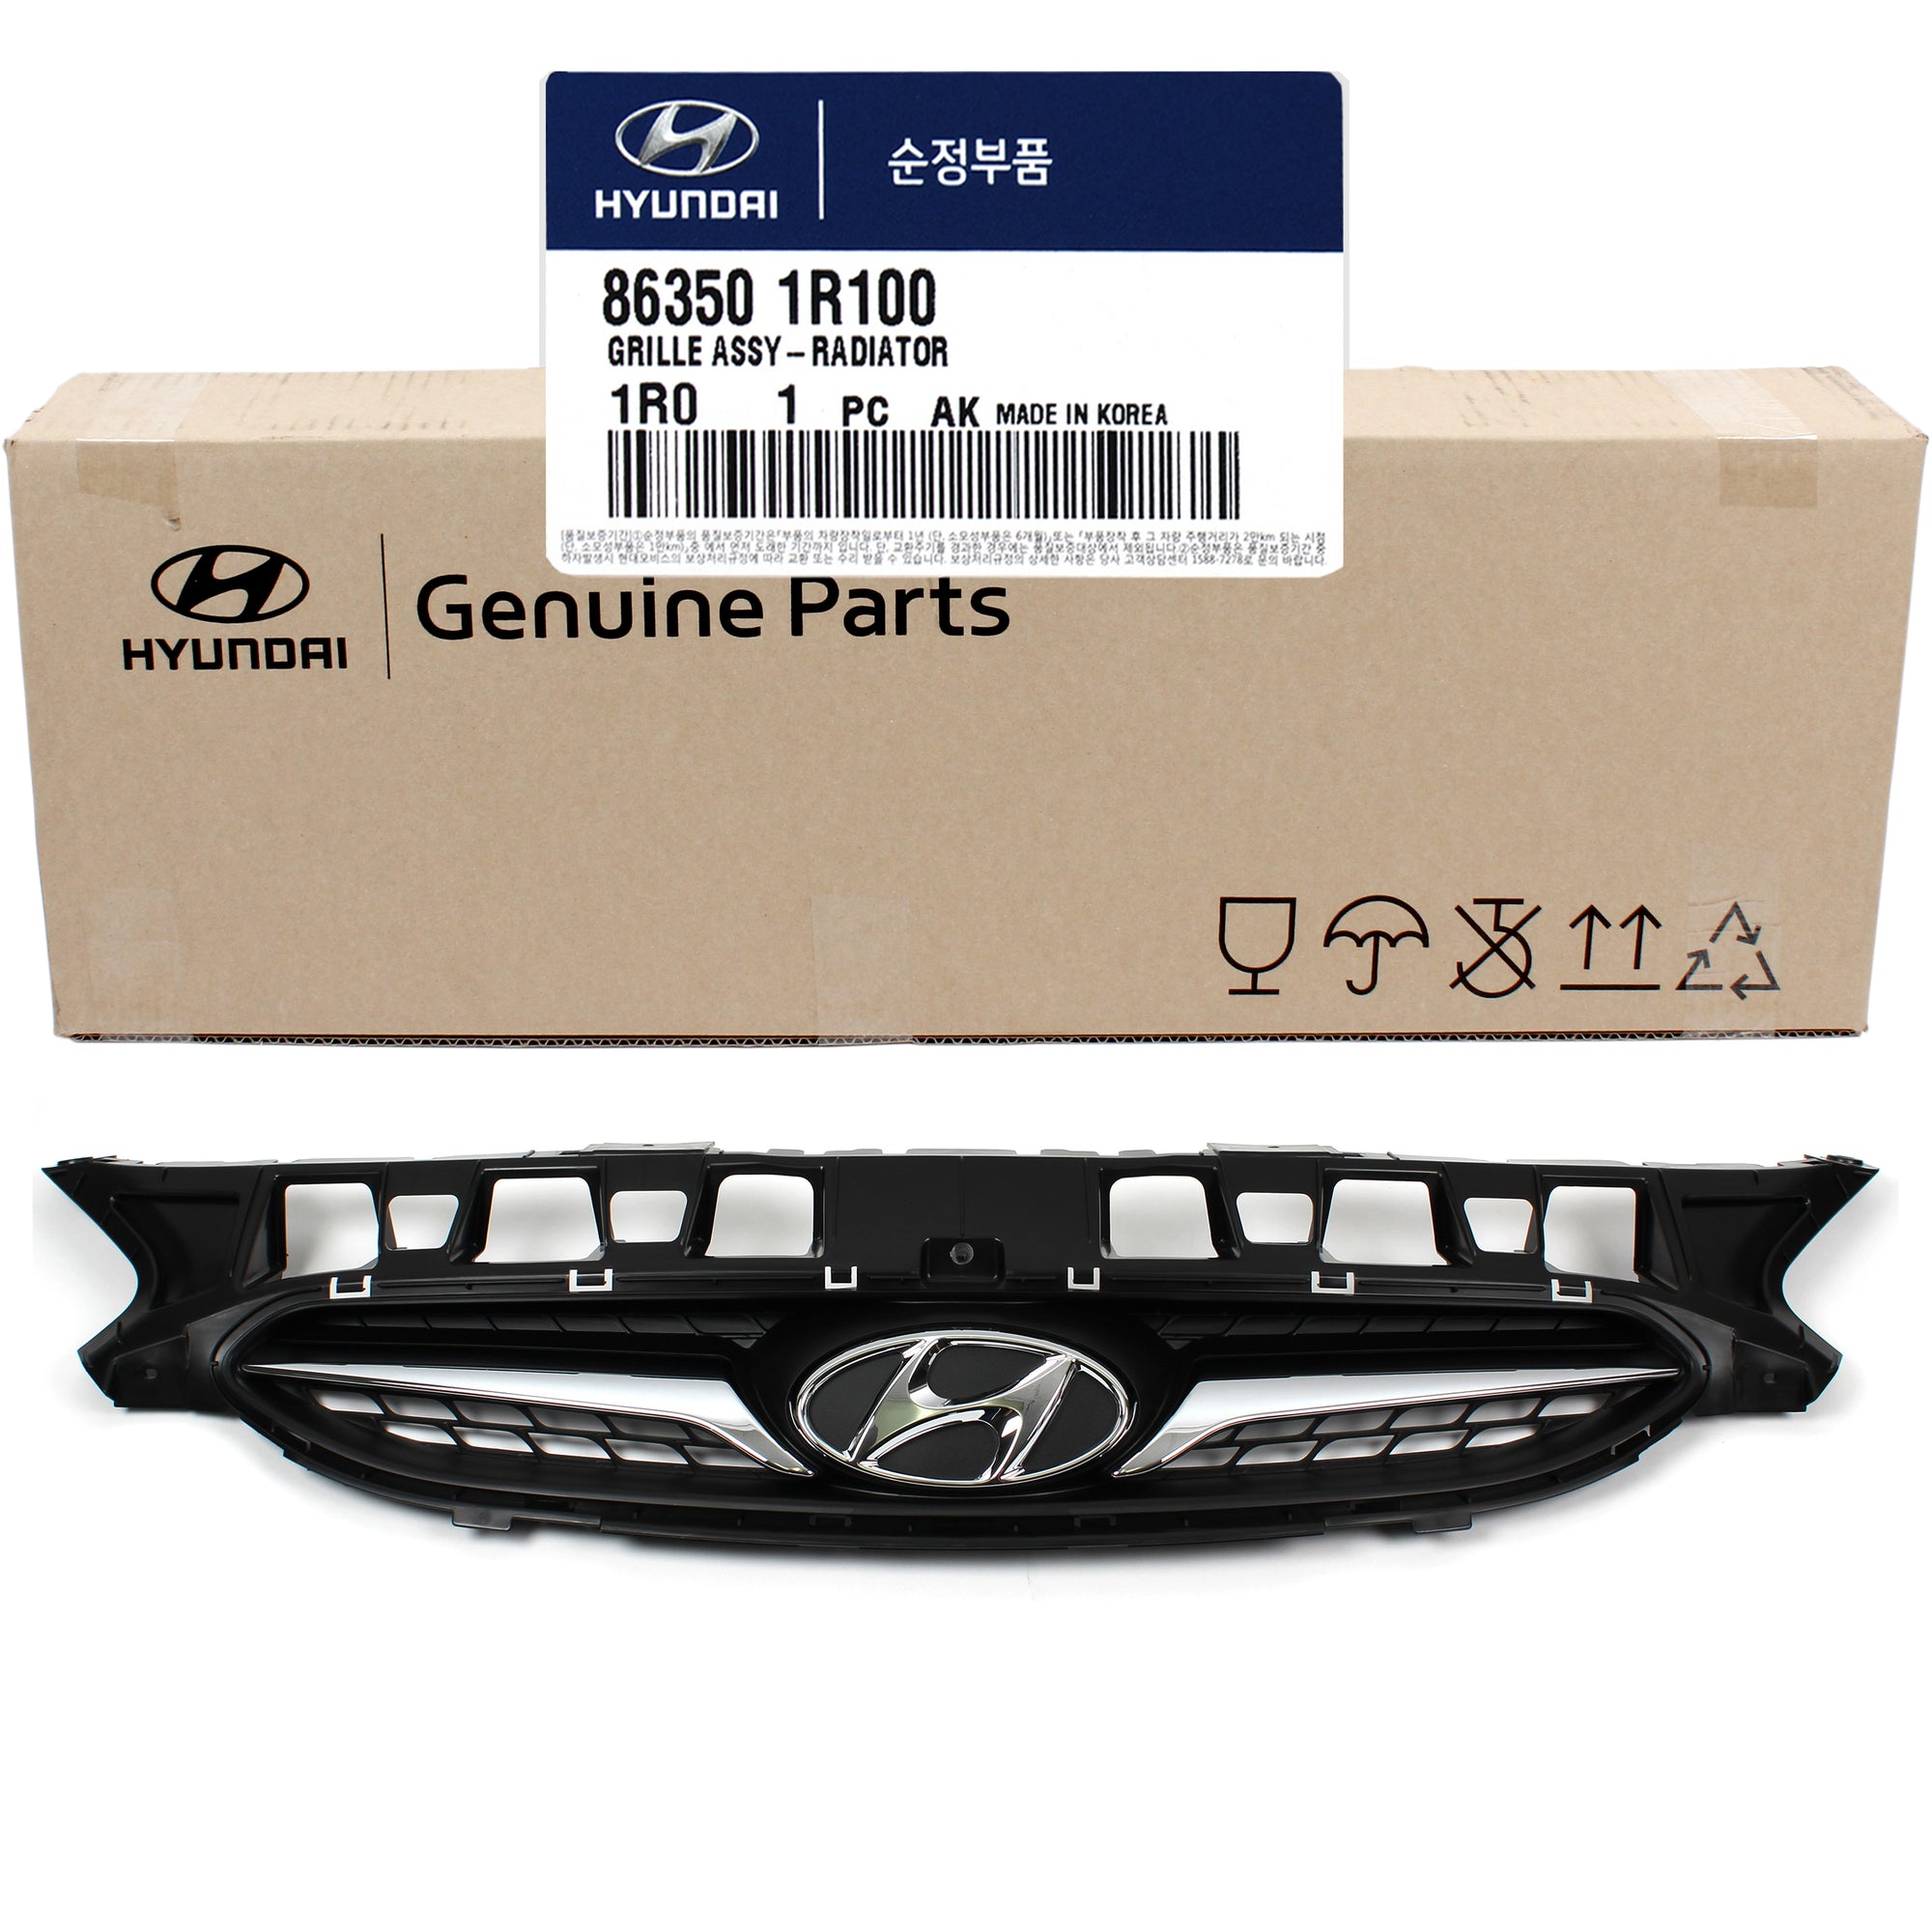 GENUINE Front Grille & Fog lamp Covers for 12-14 Hyundai Accent 863501R100